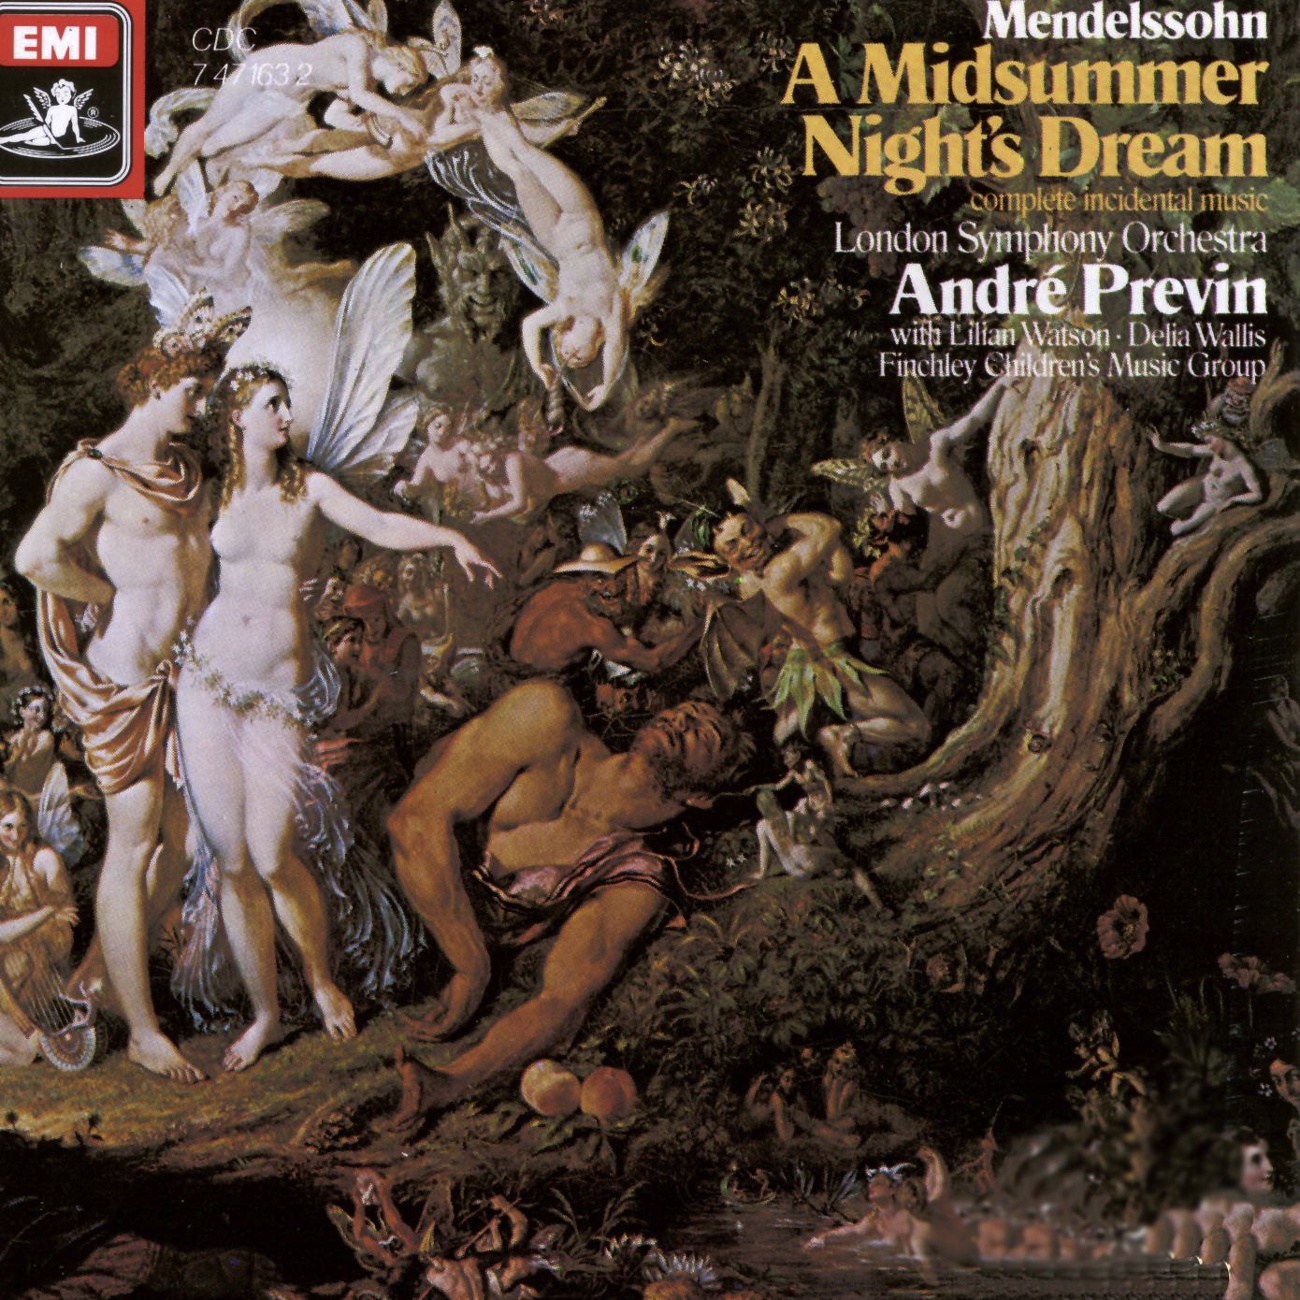 A Midsummer Night's Dream - incidental music Opp. 21 and 61 (1985 Digital Remaster): Fanfare and Funeral March (Act 5)